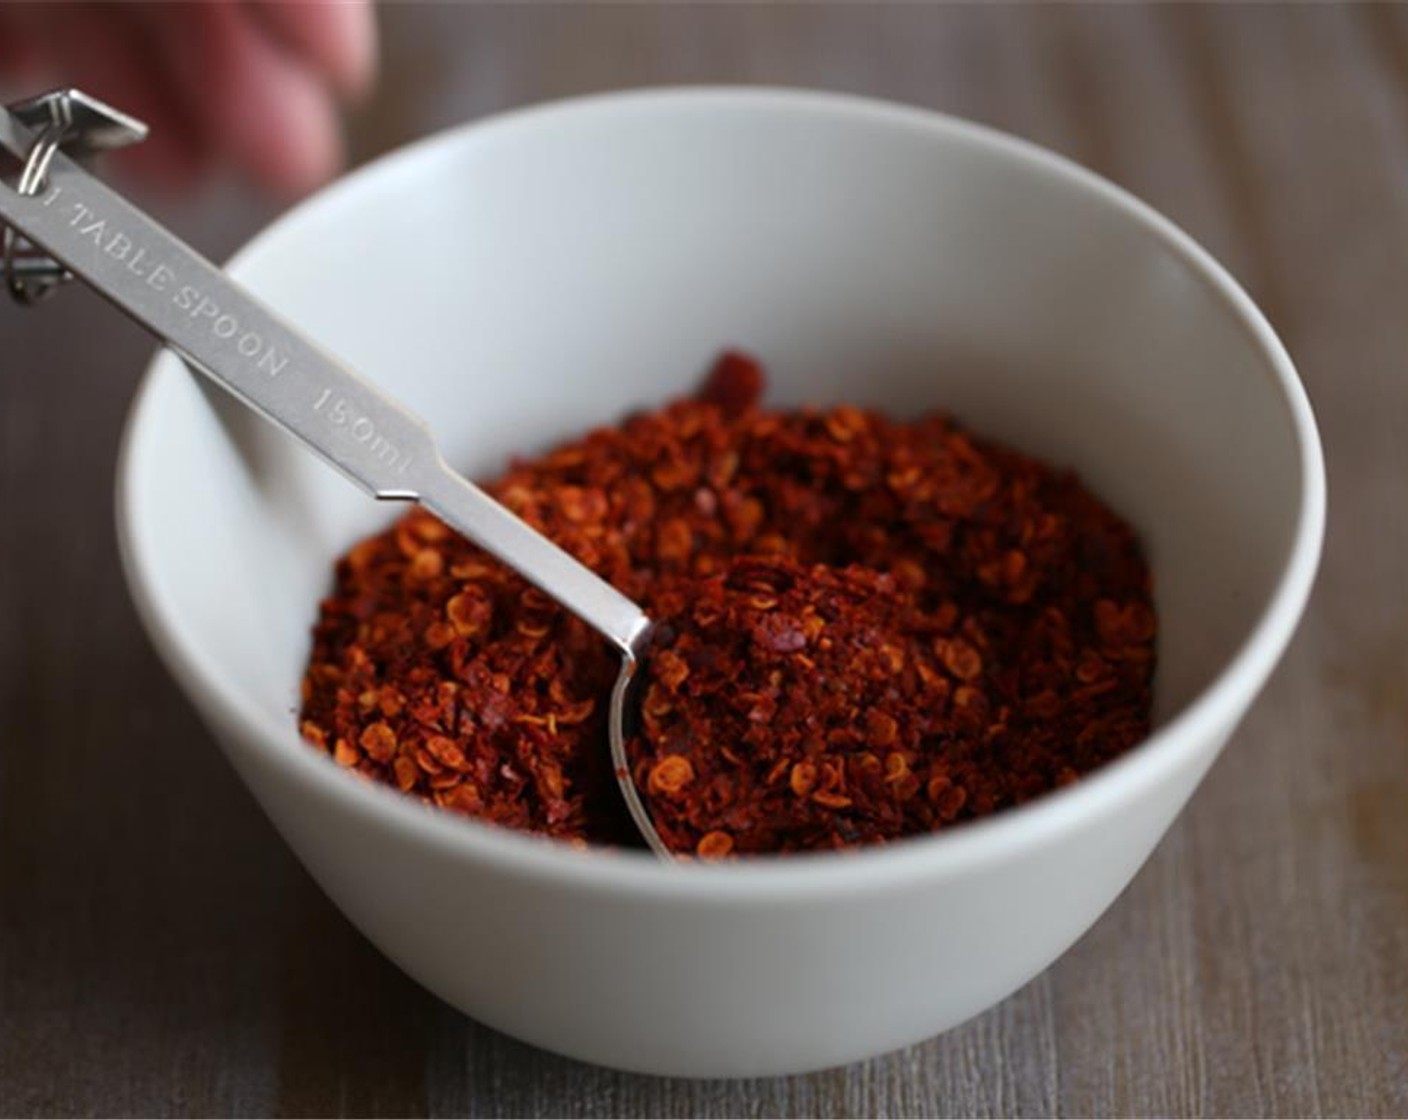 step 3 Place around 5 tablespoons of Red Chili Powder (1/3 cup) in a bowl.